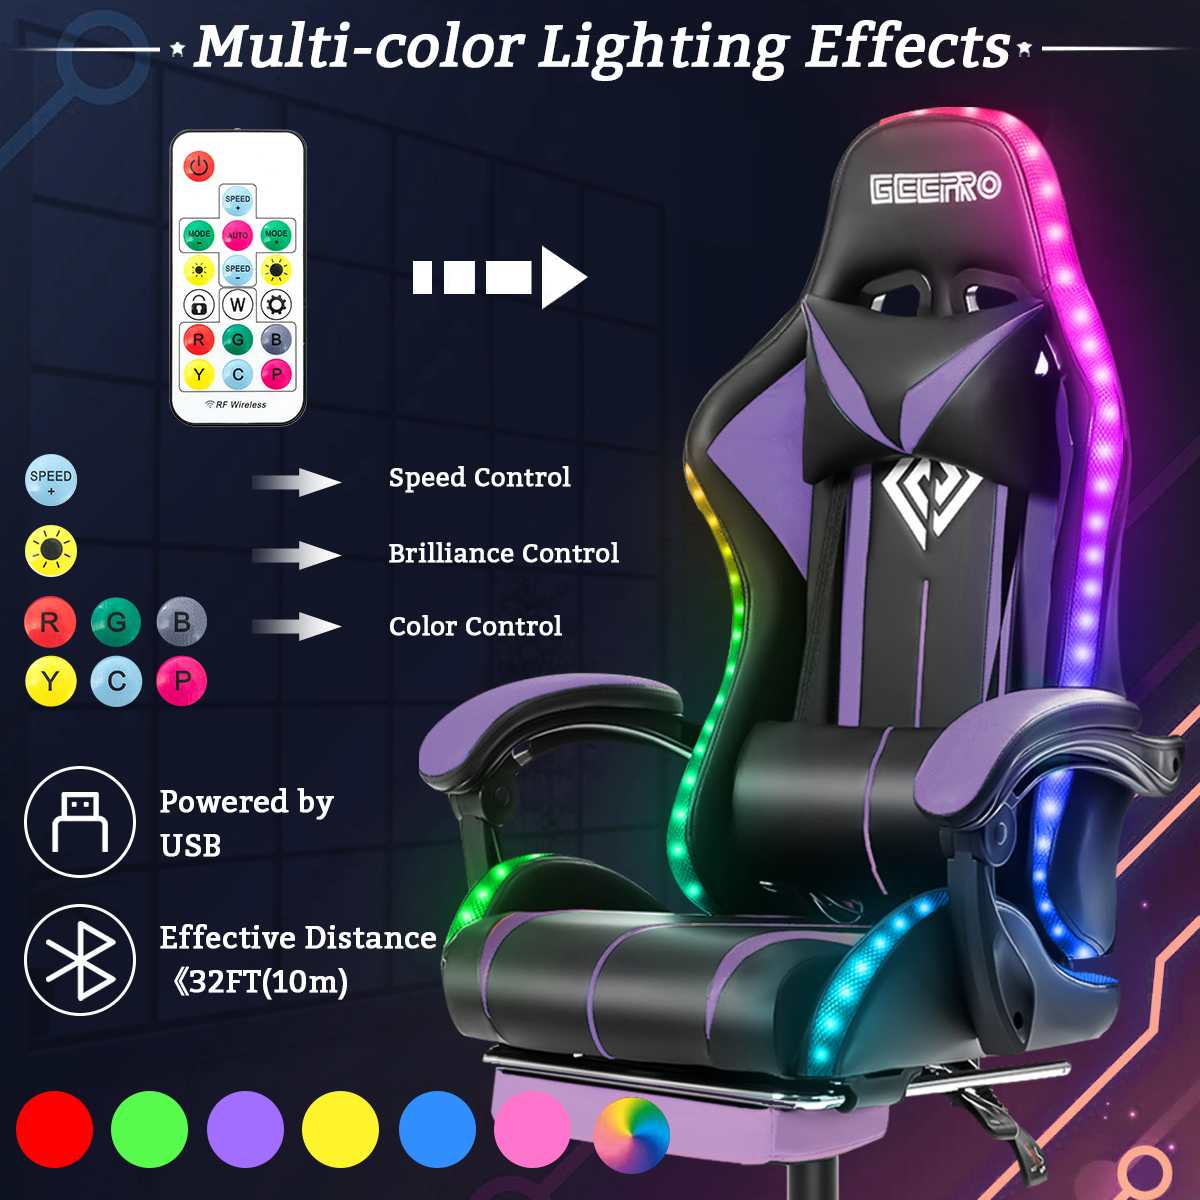 Homio Decor Office Gaming Chair with RGB Lights (+ 2 Massage Poins)